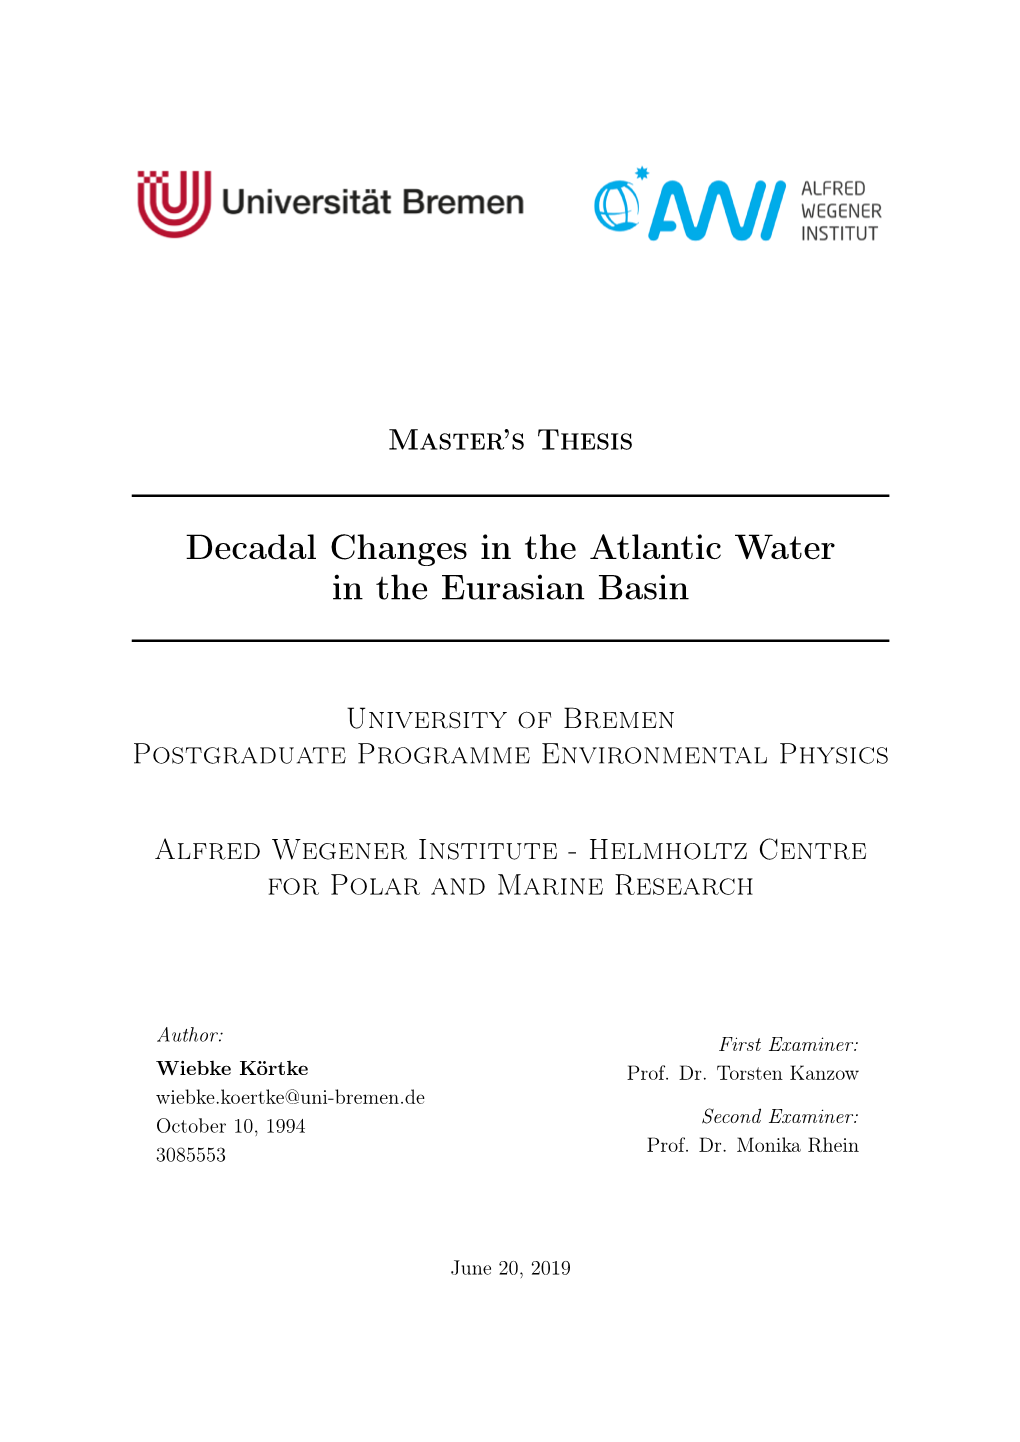 Decadal Changes in the Atlantic Water in the Eurasian Basin